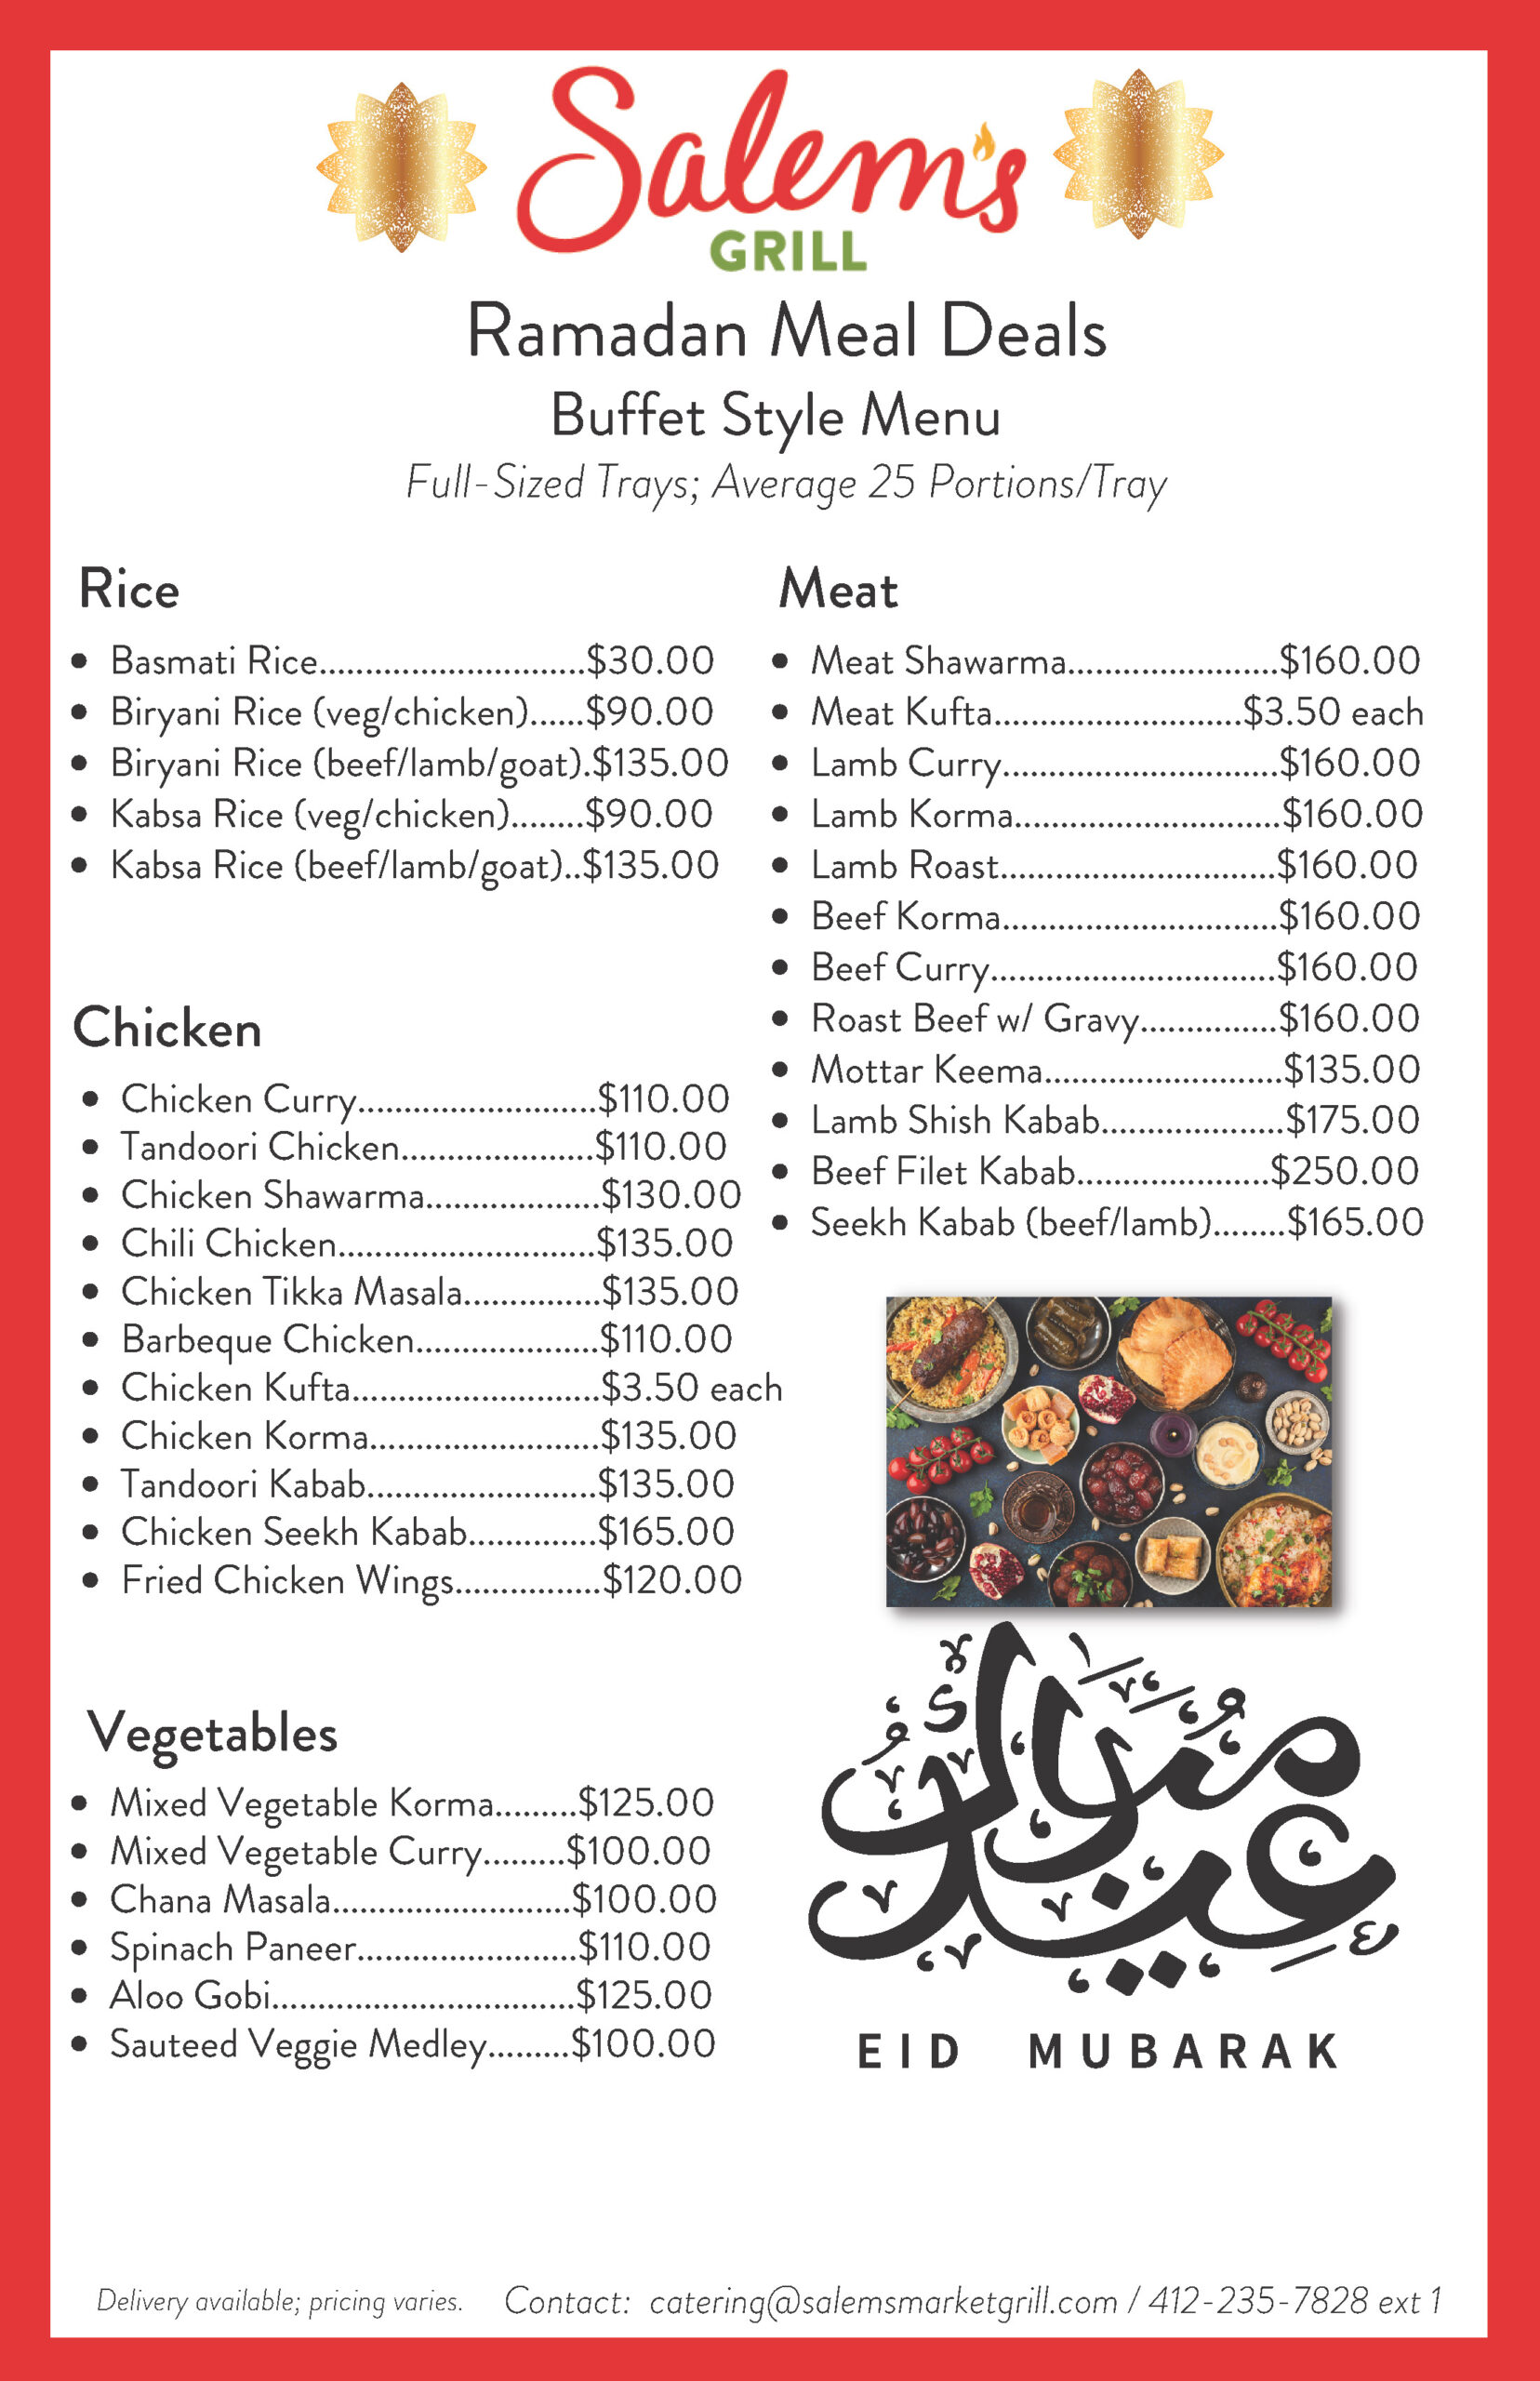 Large tray meals for Ramadan. For more information call 412-235-7828.